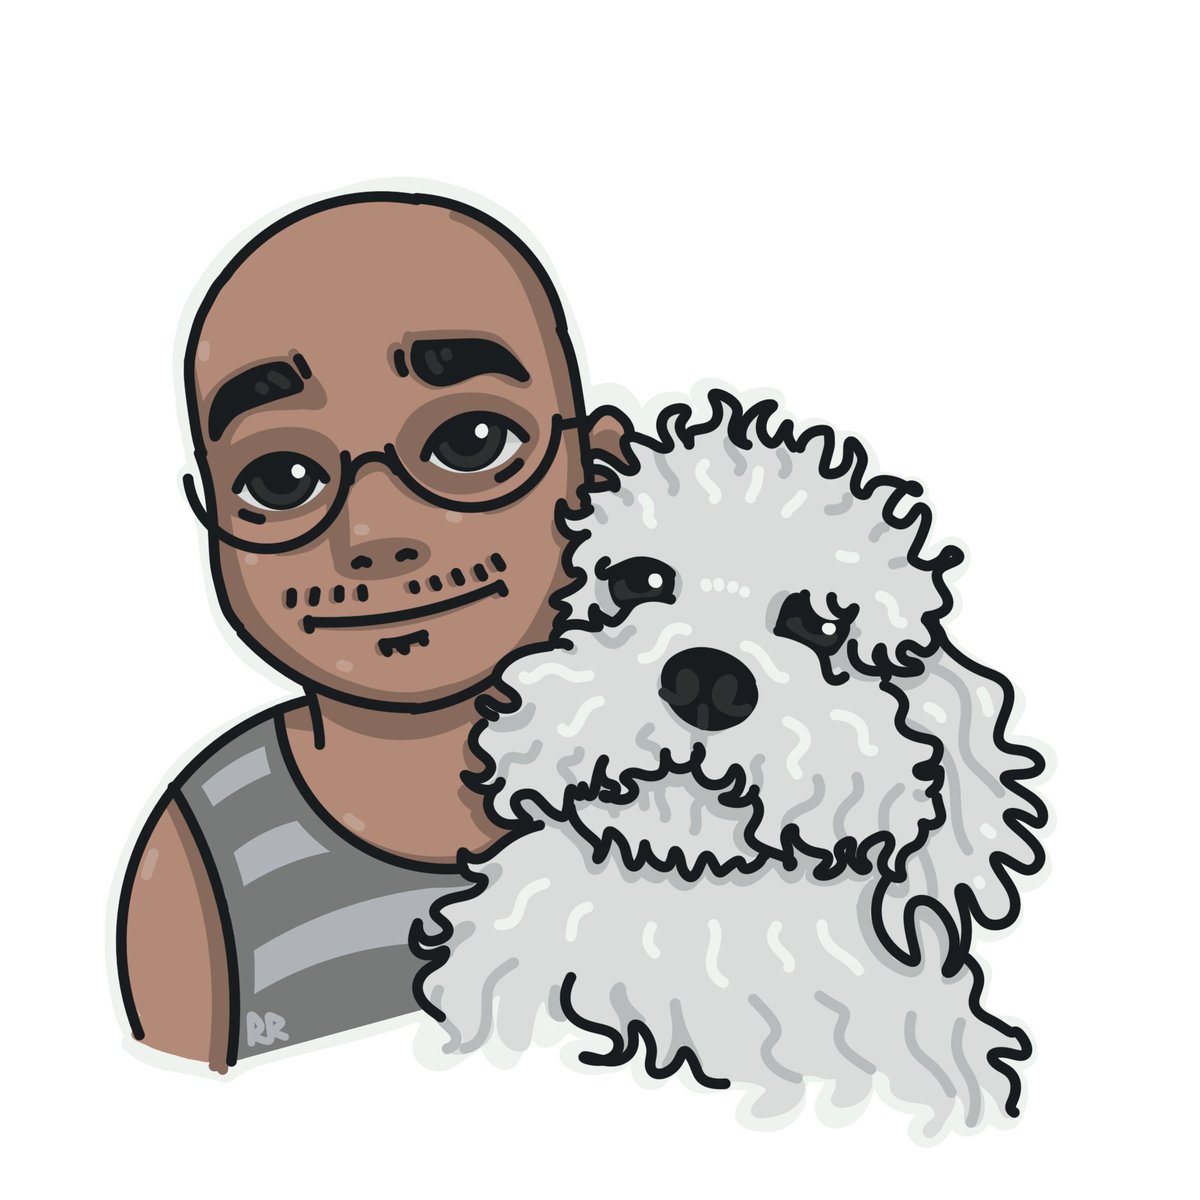 Some Chibis I made for a Client.

ps. So effing hard to draw using a phone.

#infinitepainter #chibiart #dogs